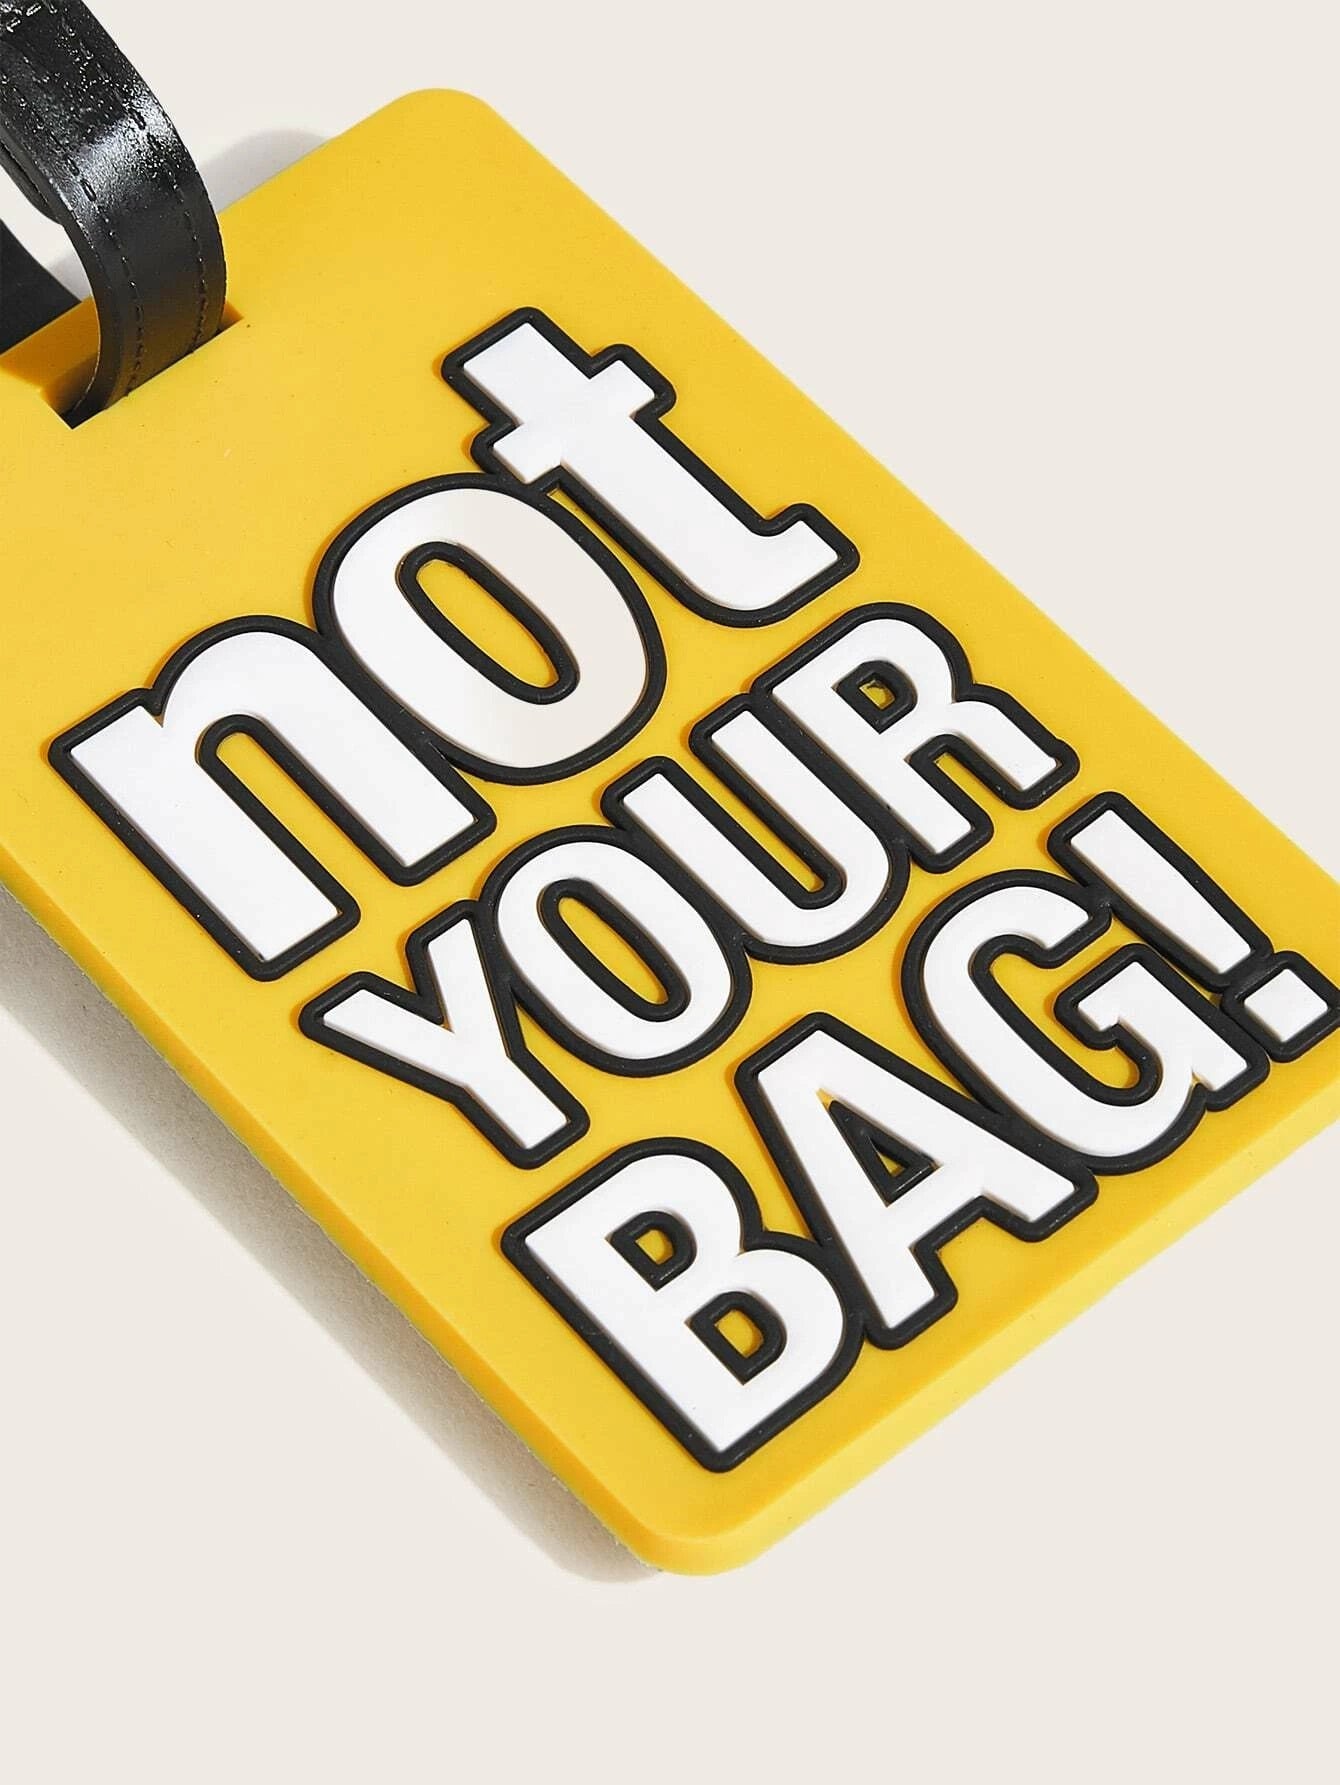 Not Your Bag Luggage Tag